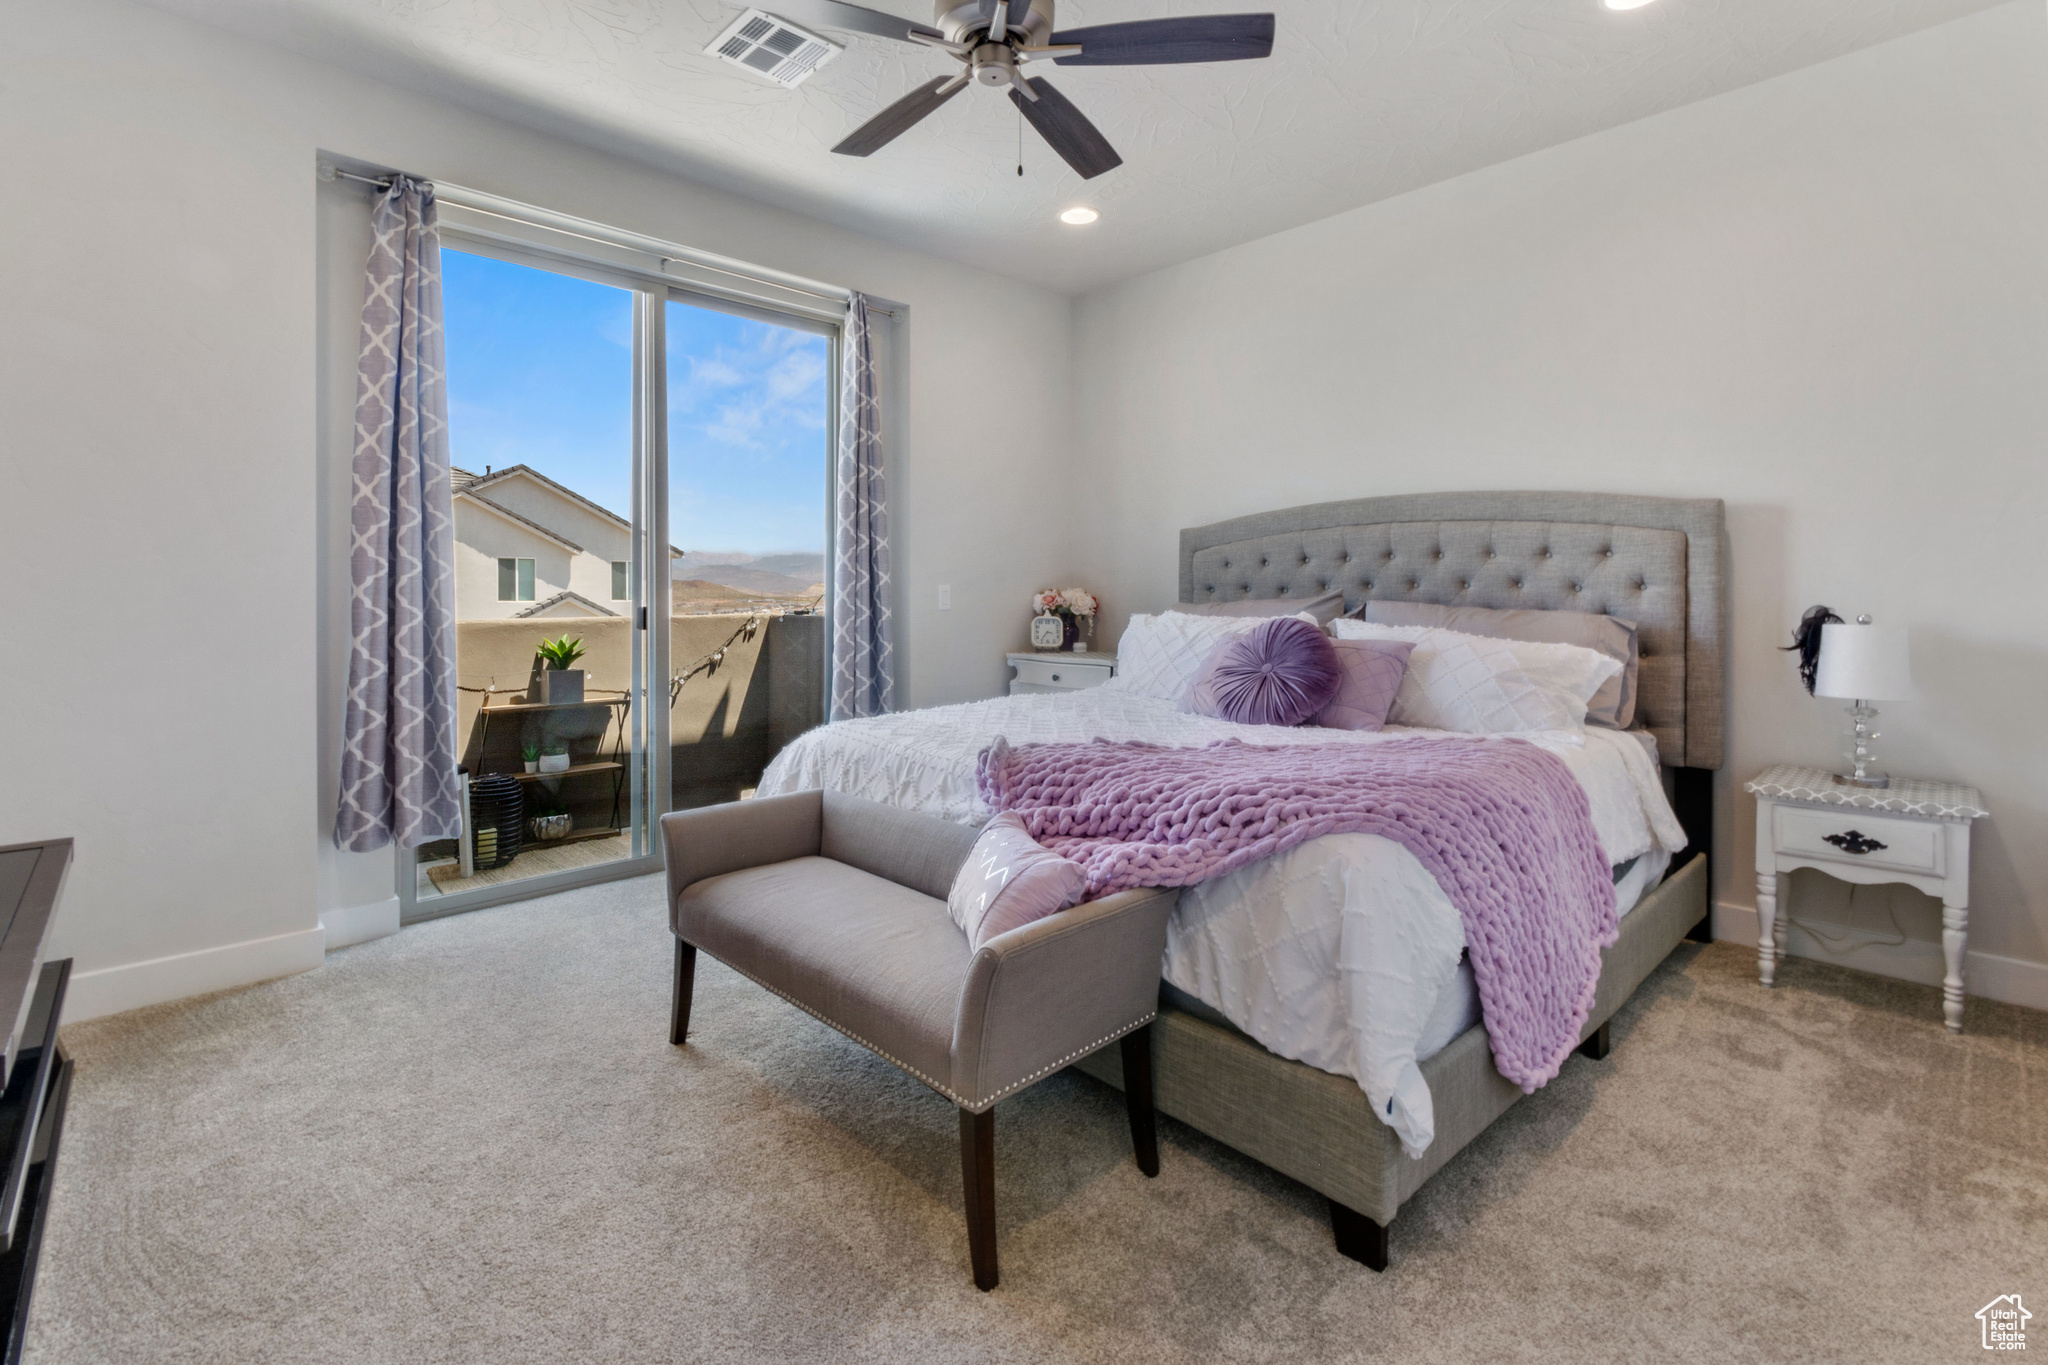 Bedroom with access to outside, carpet floors, and ceiling fan